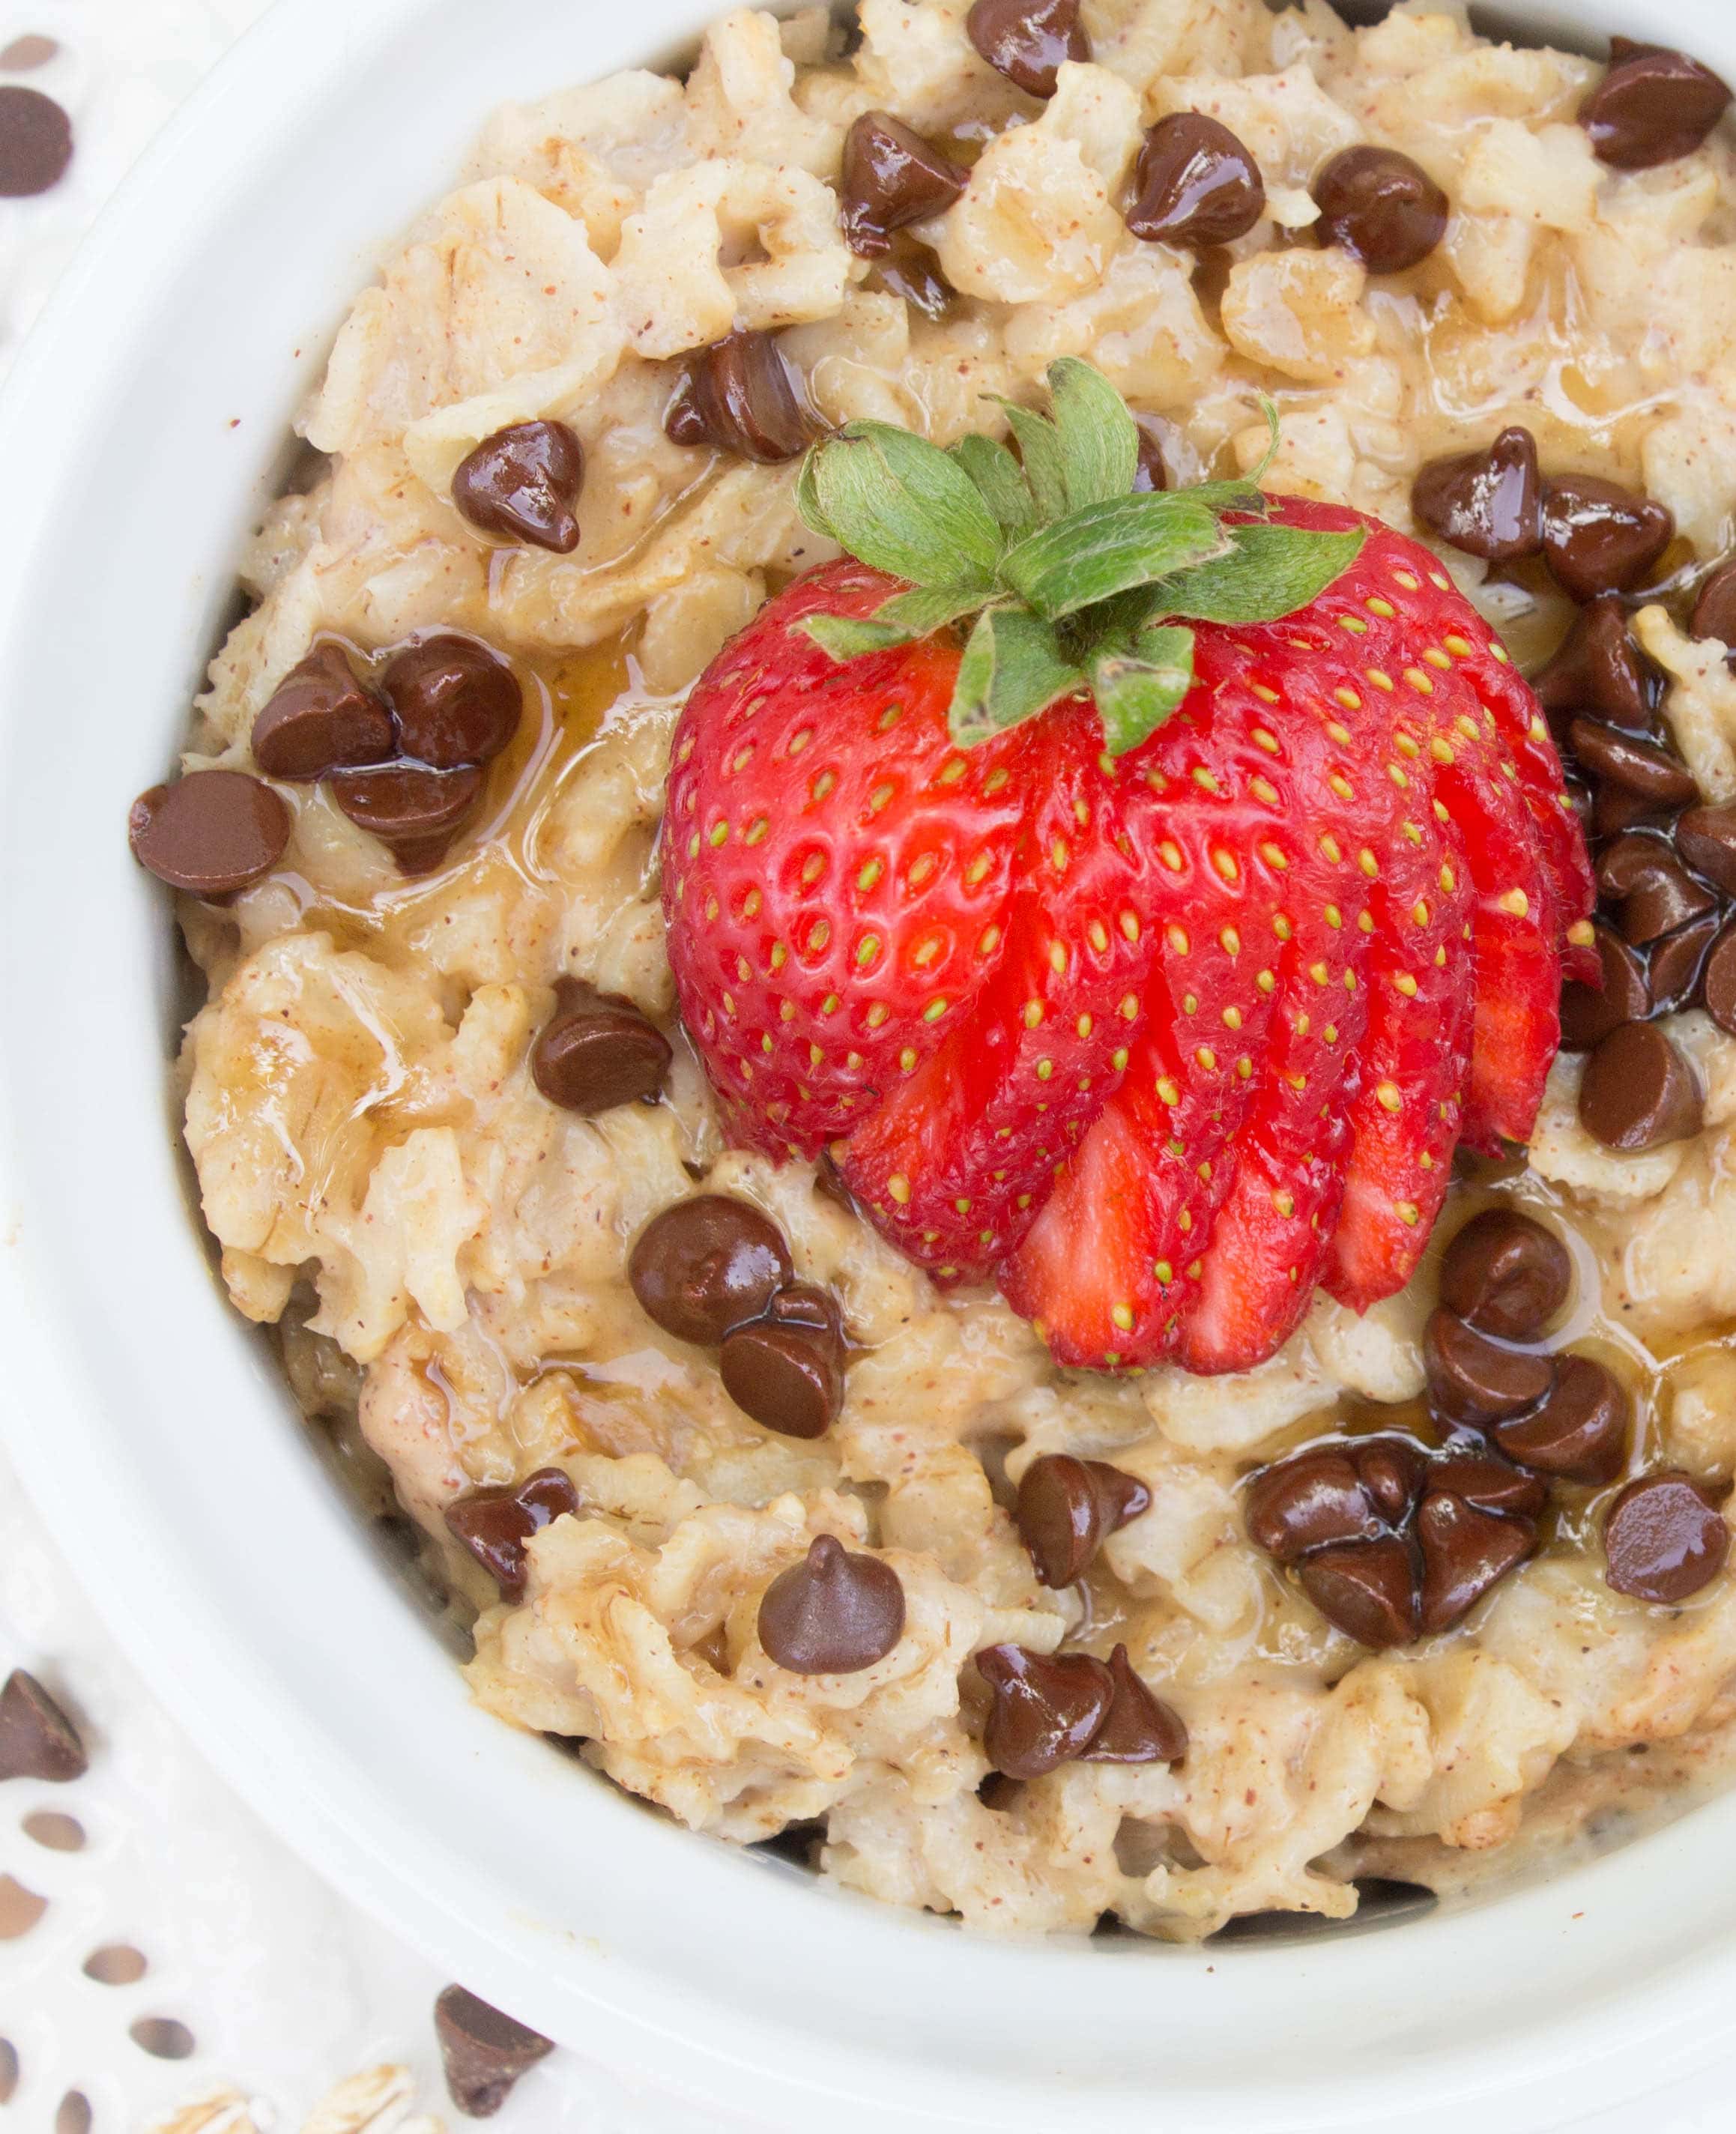 Strawberry Chocolate Chip Oatmeal